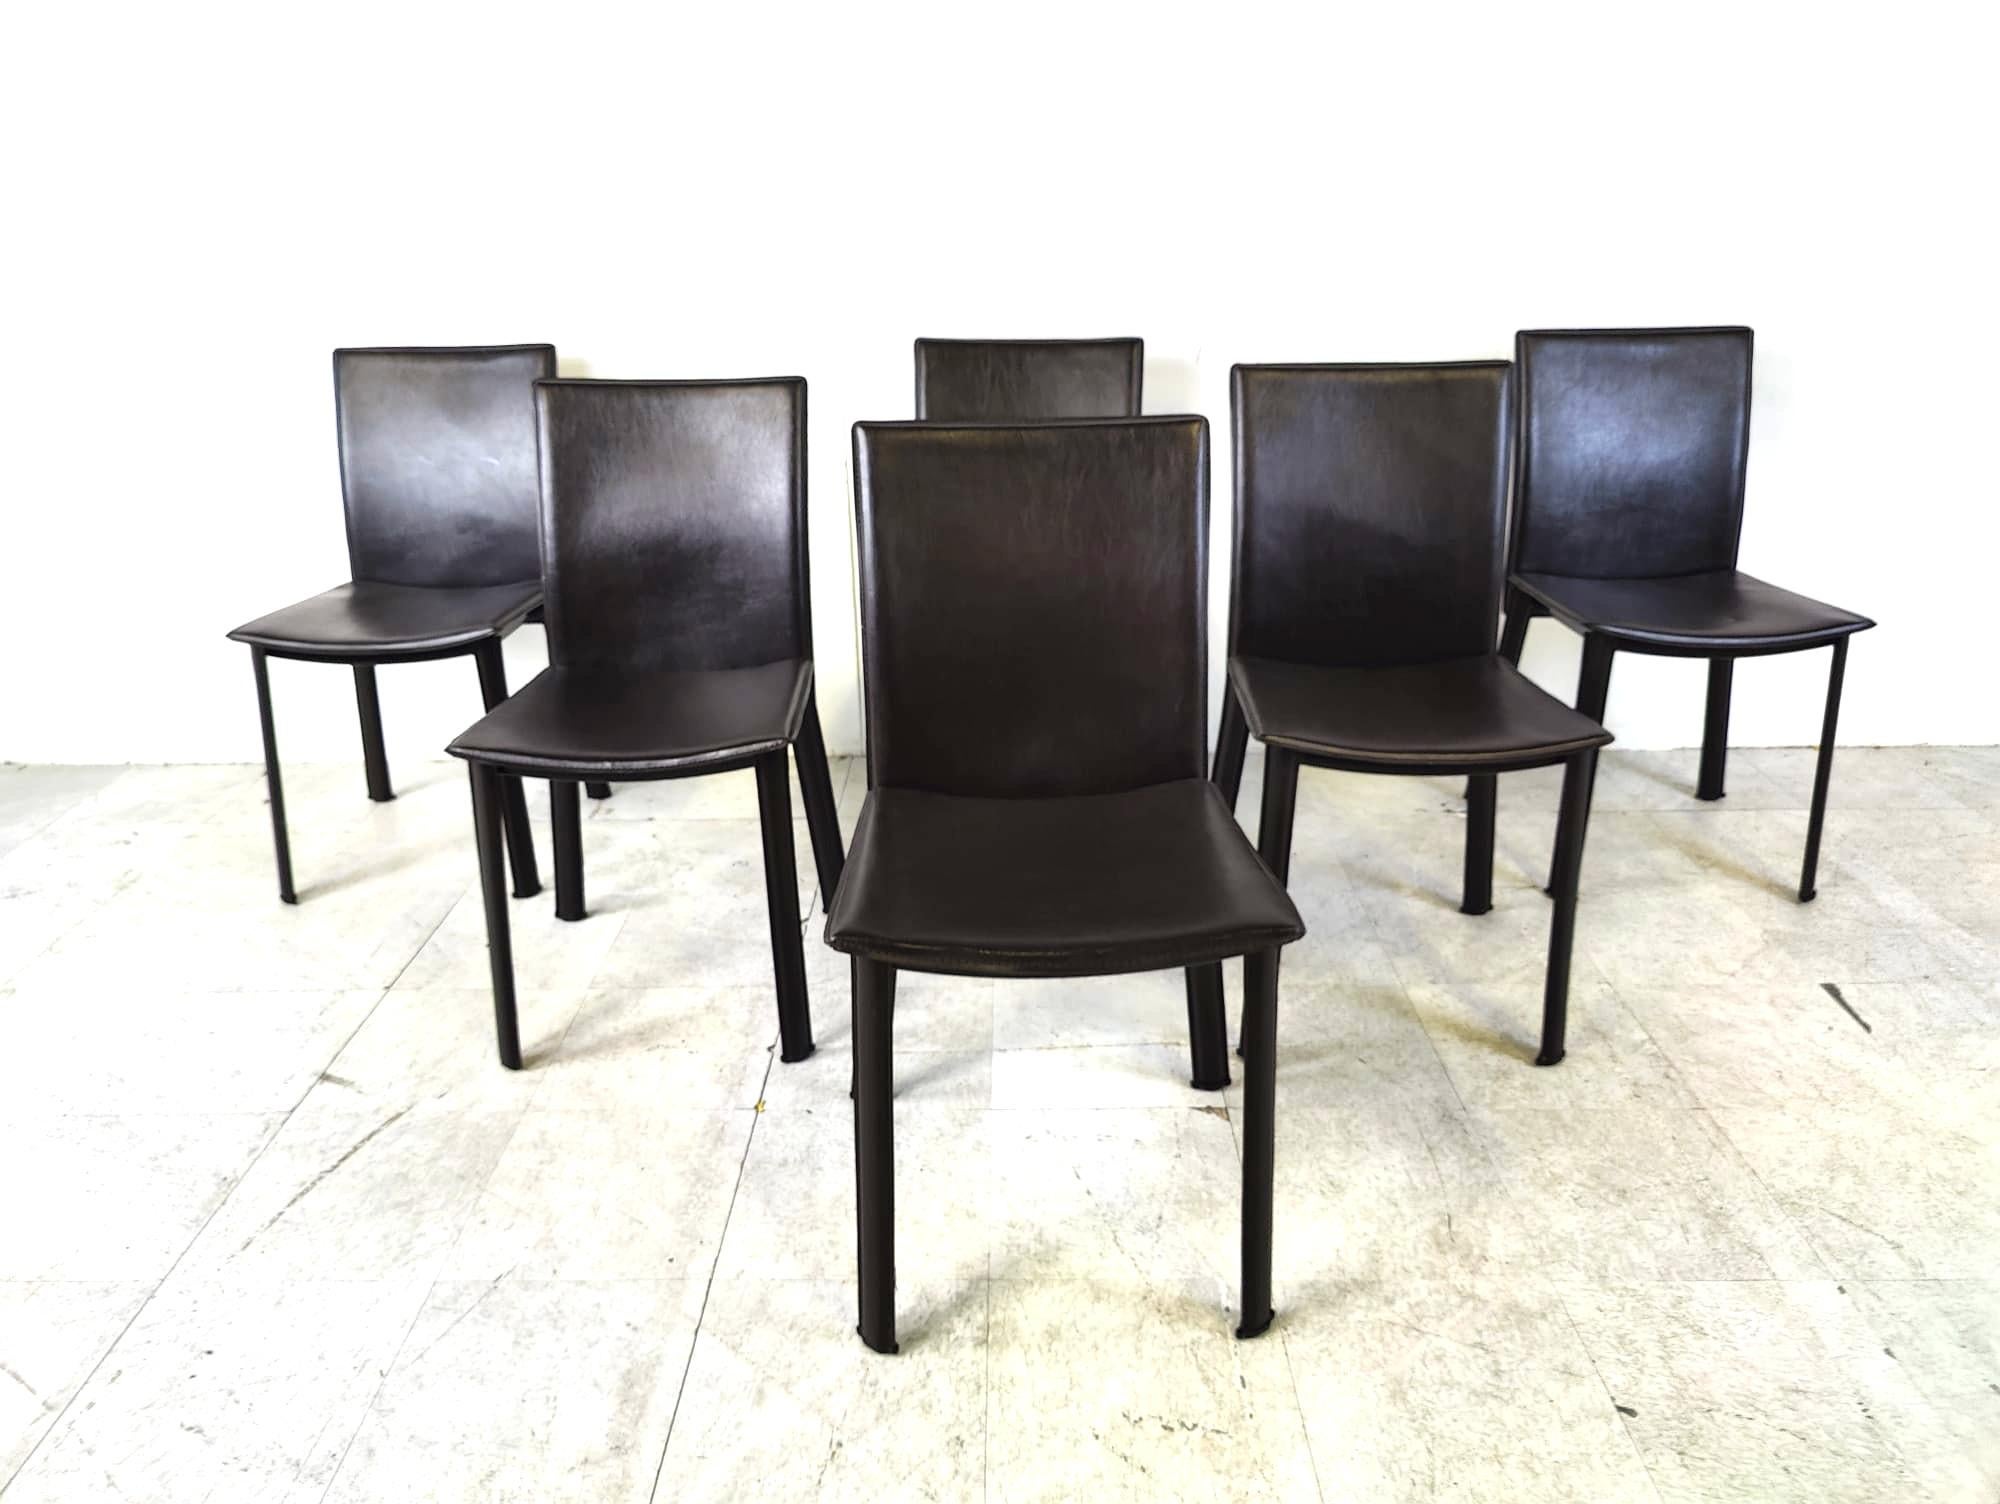 Vintage black leather upholstered dining chairs by Cattelan italy.

Comfortable dining chairs with nicely stiched leather.

Good overal condition

1980s - Italy

Dimensions
Height: 86cm
Width x depth :46cm
Seat height: 46cm

Ref.: 474747

*Price is